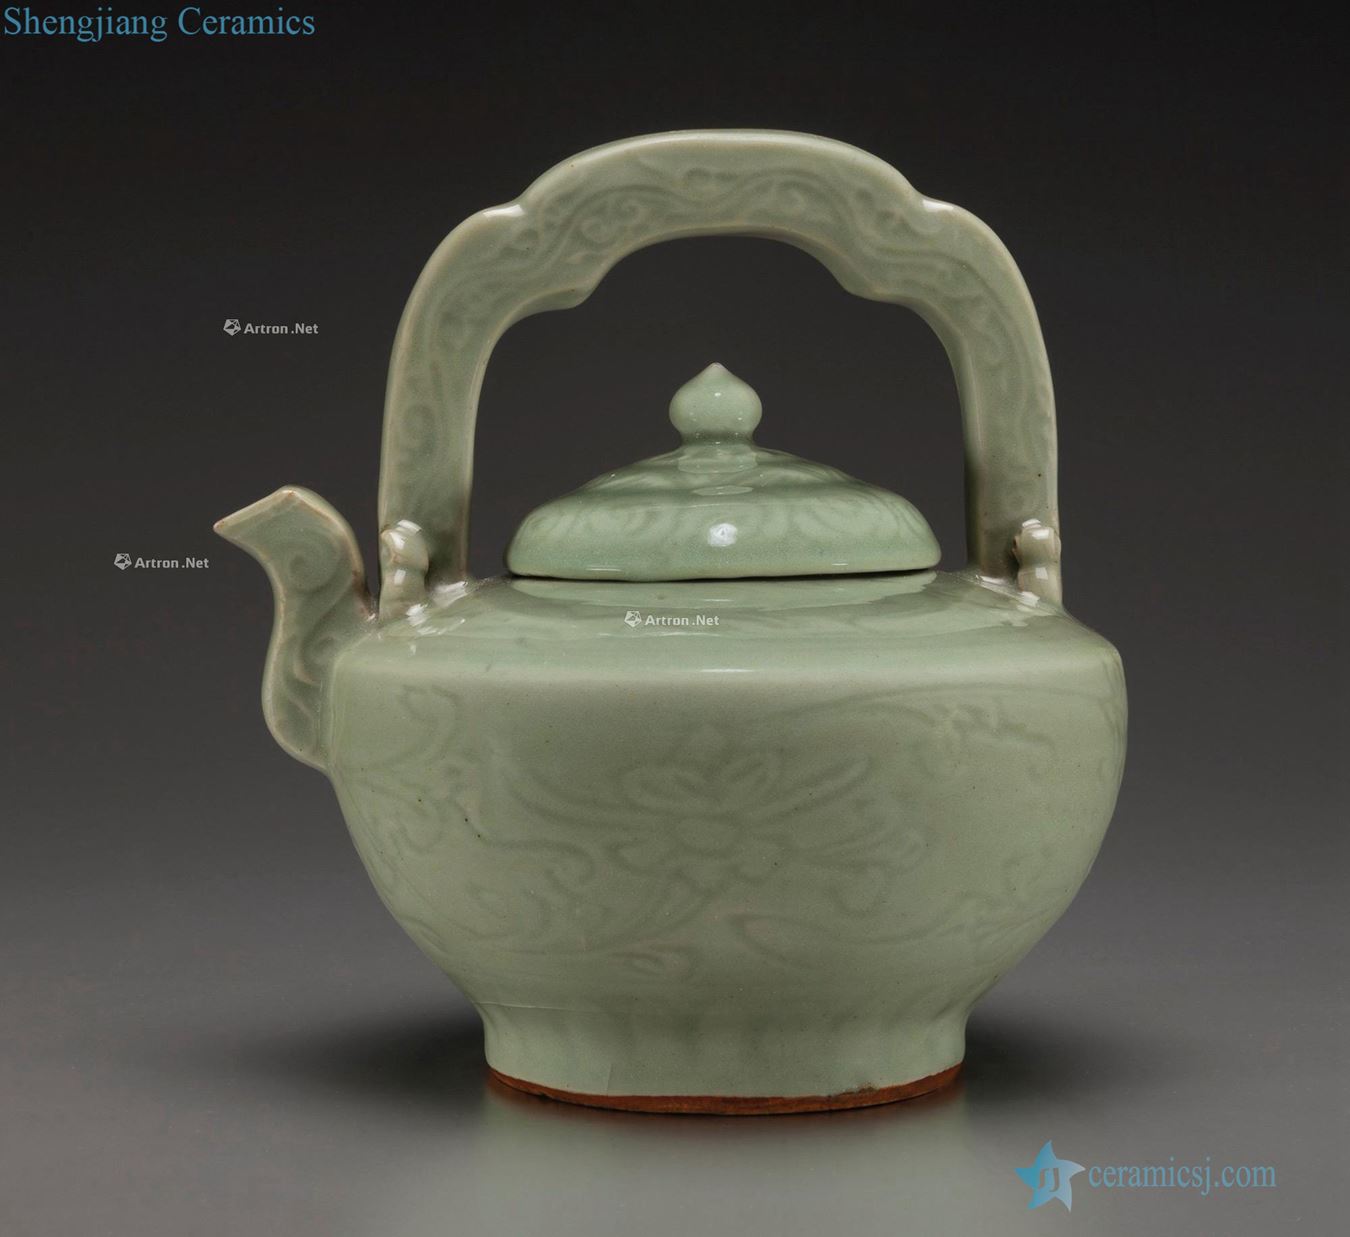 In the Ming dynasty, 15 to 16 century A VERY RARE LONGQUAN CELADON TEAPOT AND COVER